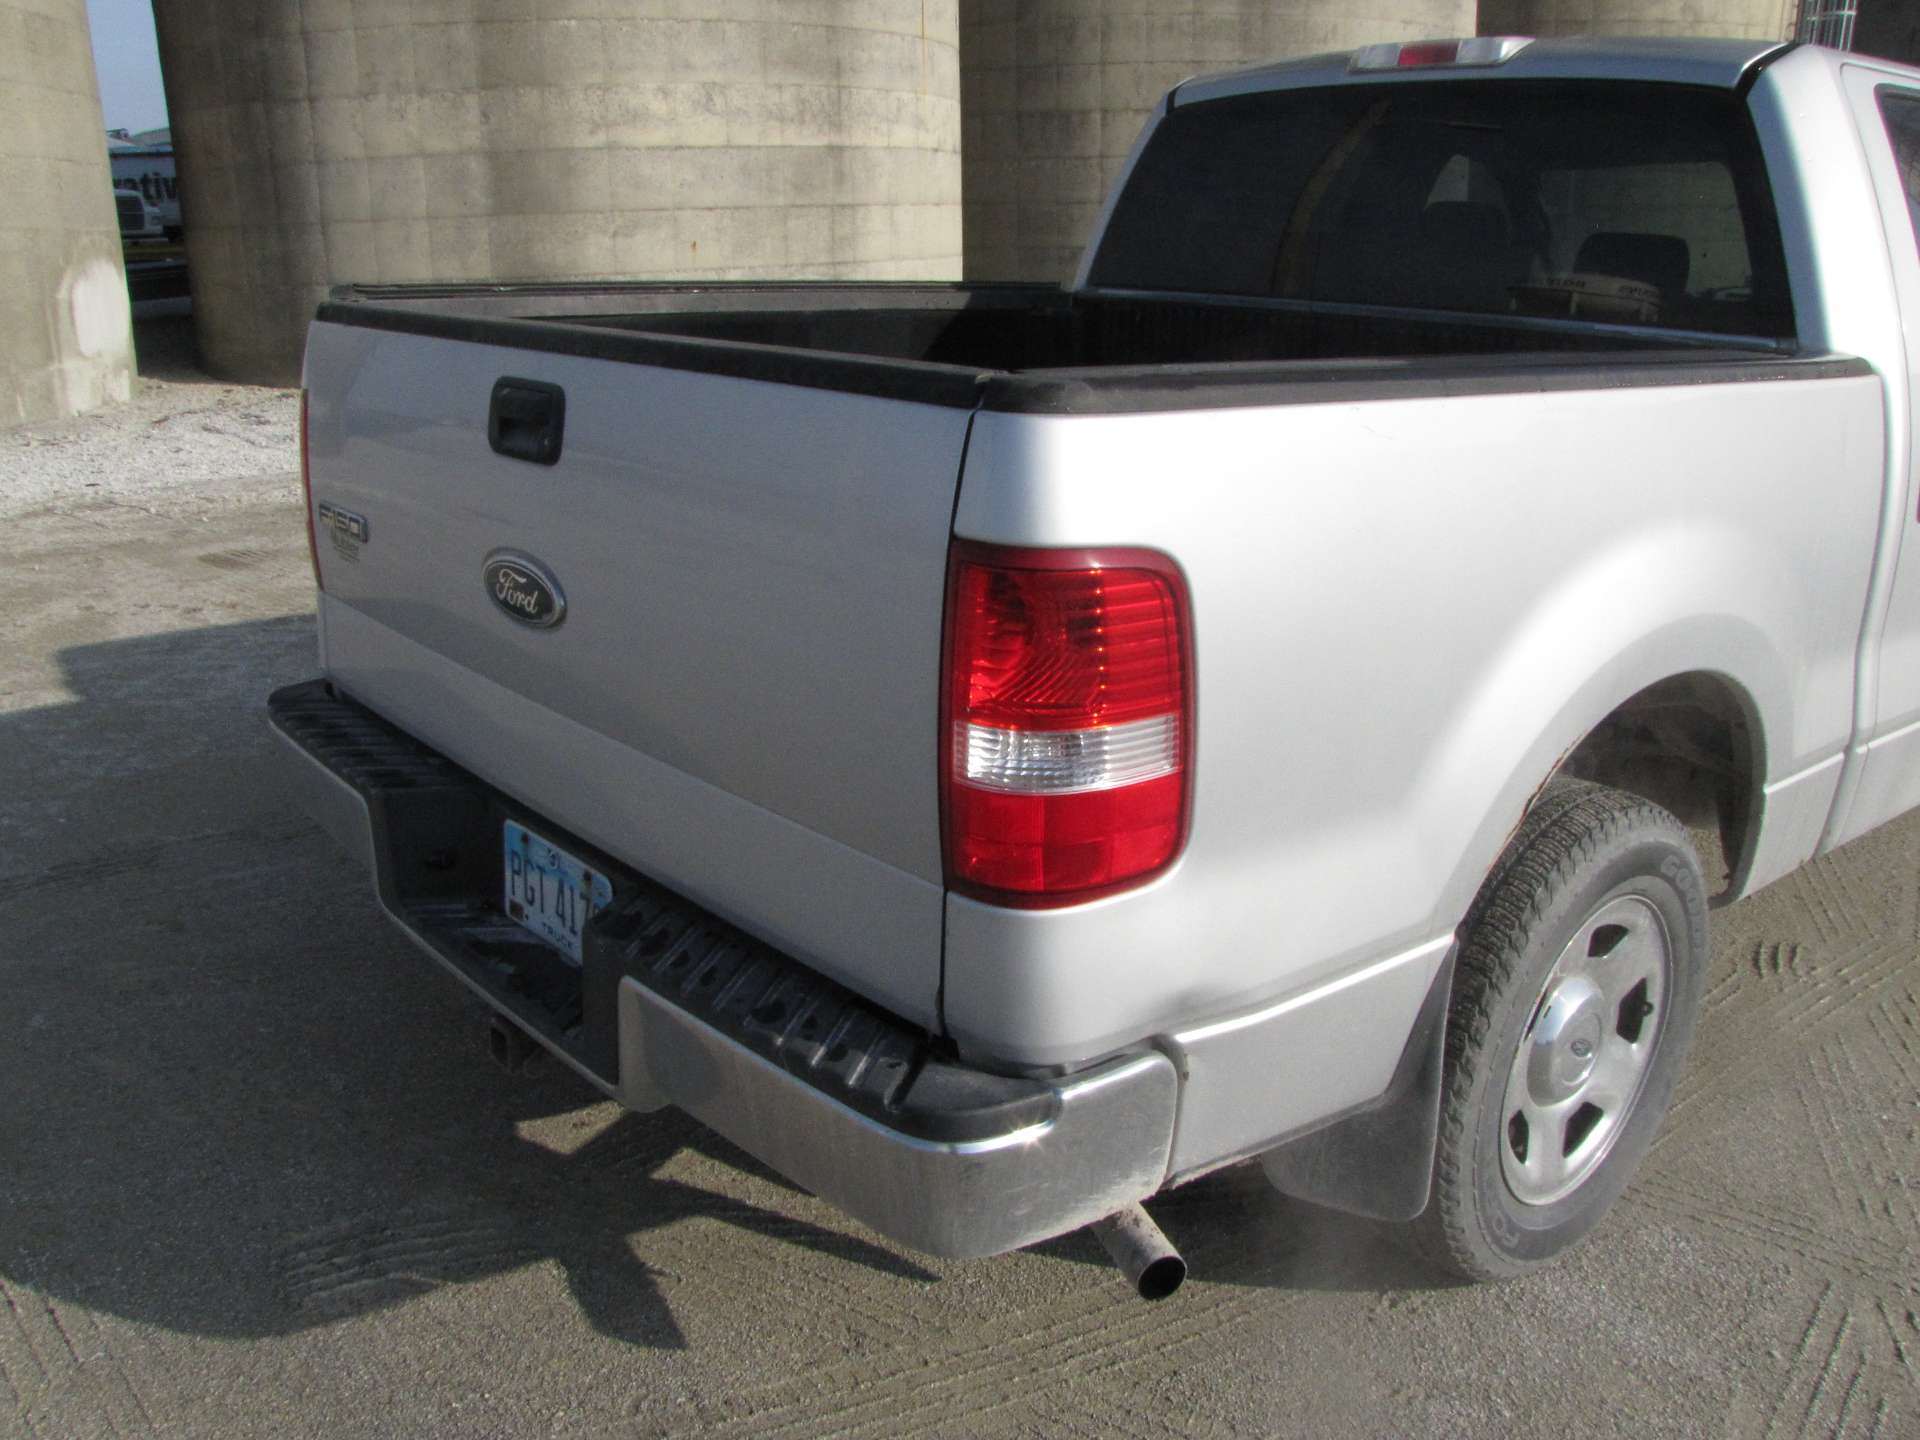 2005 Ford F-150 XLT pickup truck - Image 49 of 89